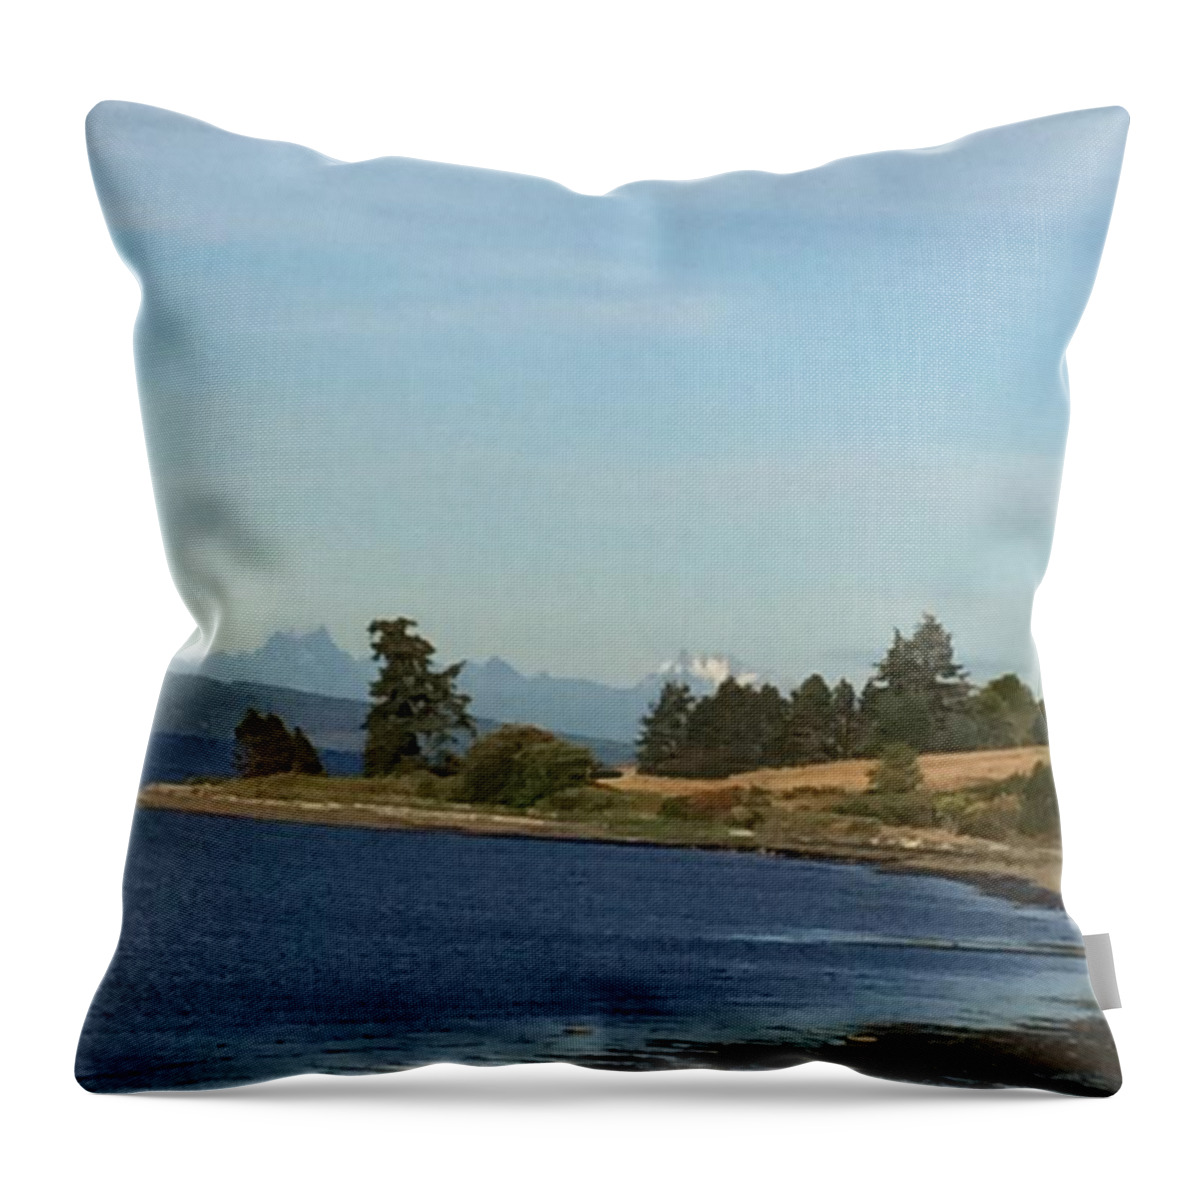 Water Throw Pillow featuring the photograph Along Dugualla Bay by Suzanne Schaefer